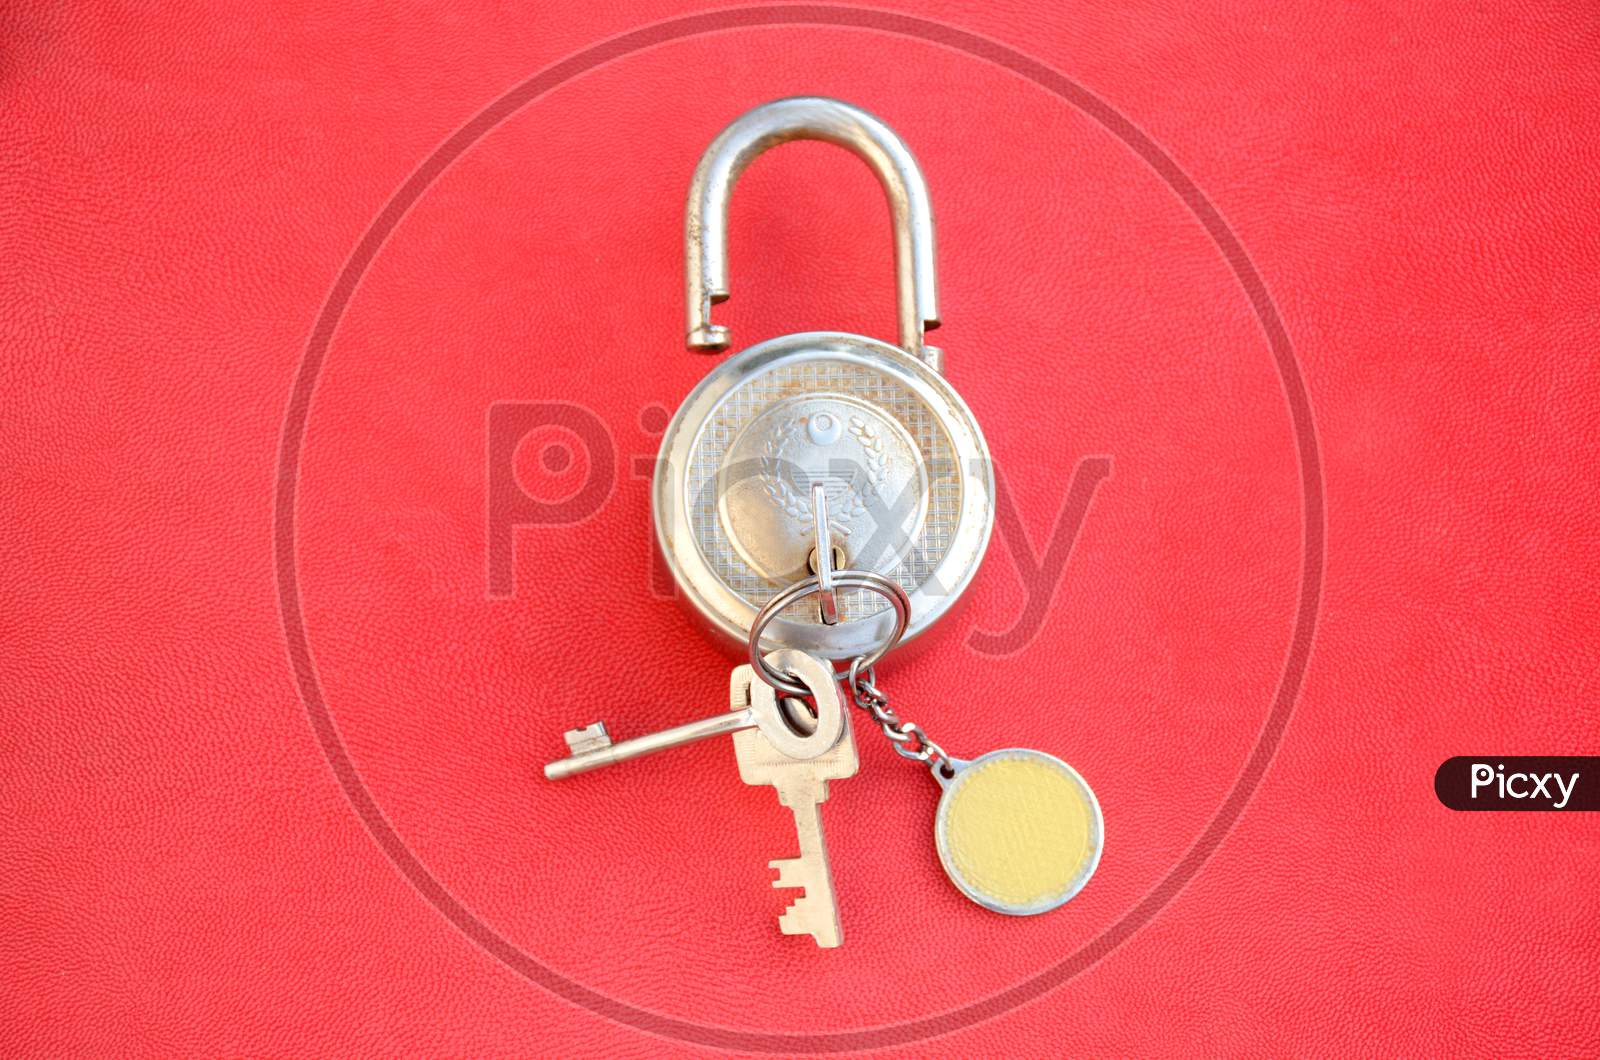 Closeup The Old Brass Metal Door Lock With Key And Key Ring Over Out Of Focus Red Background.